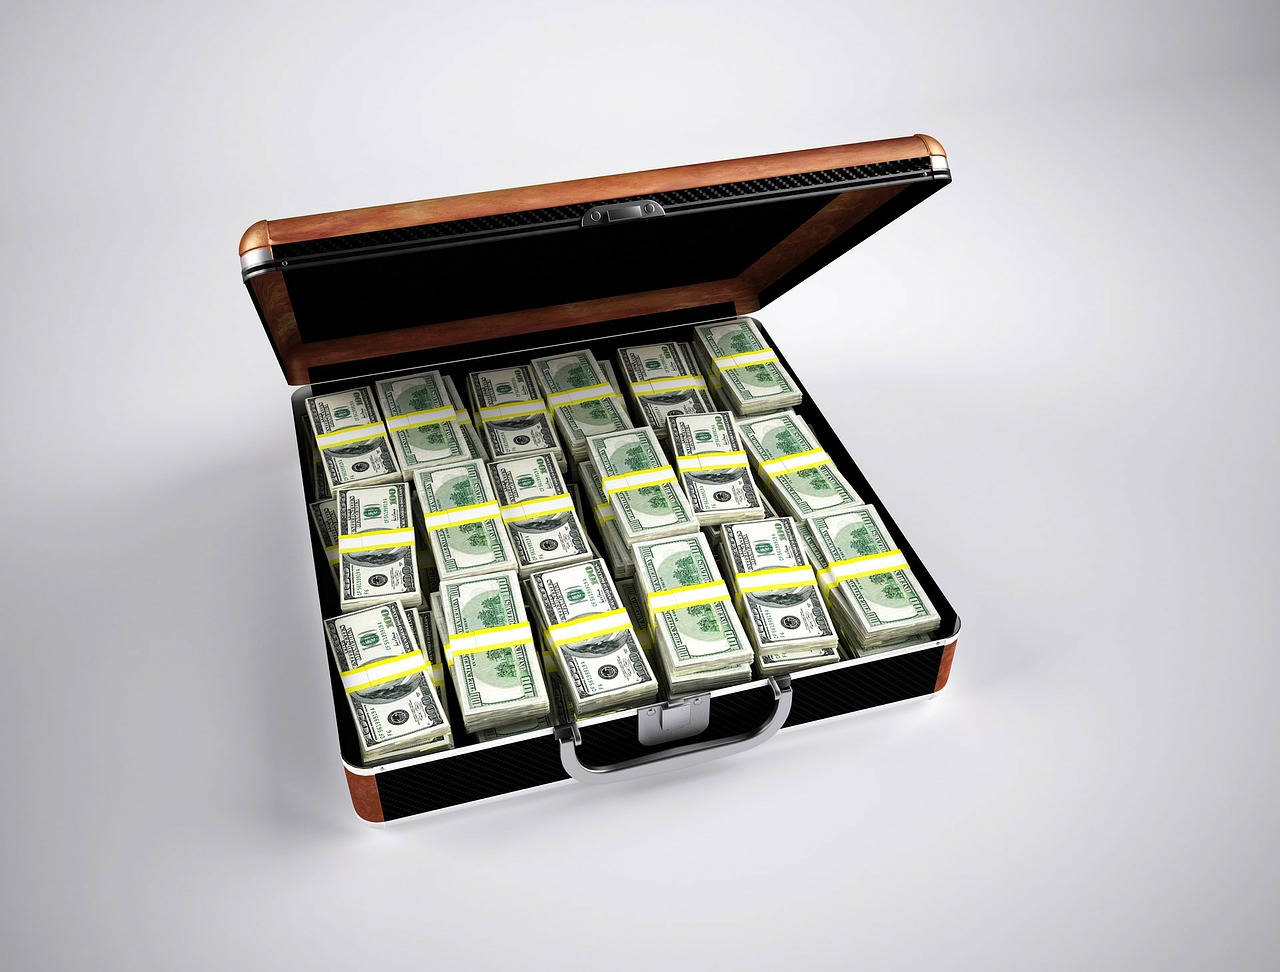 Briefcase with money inside